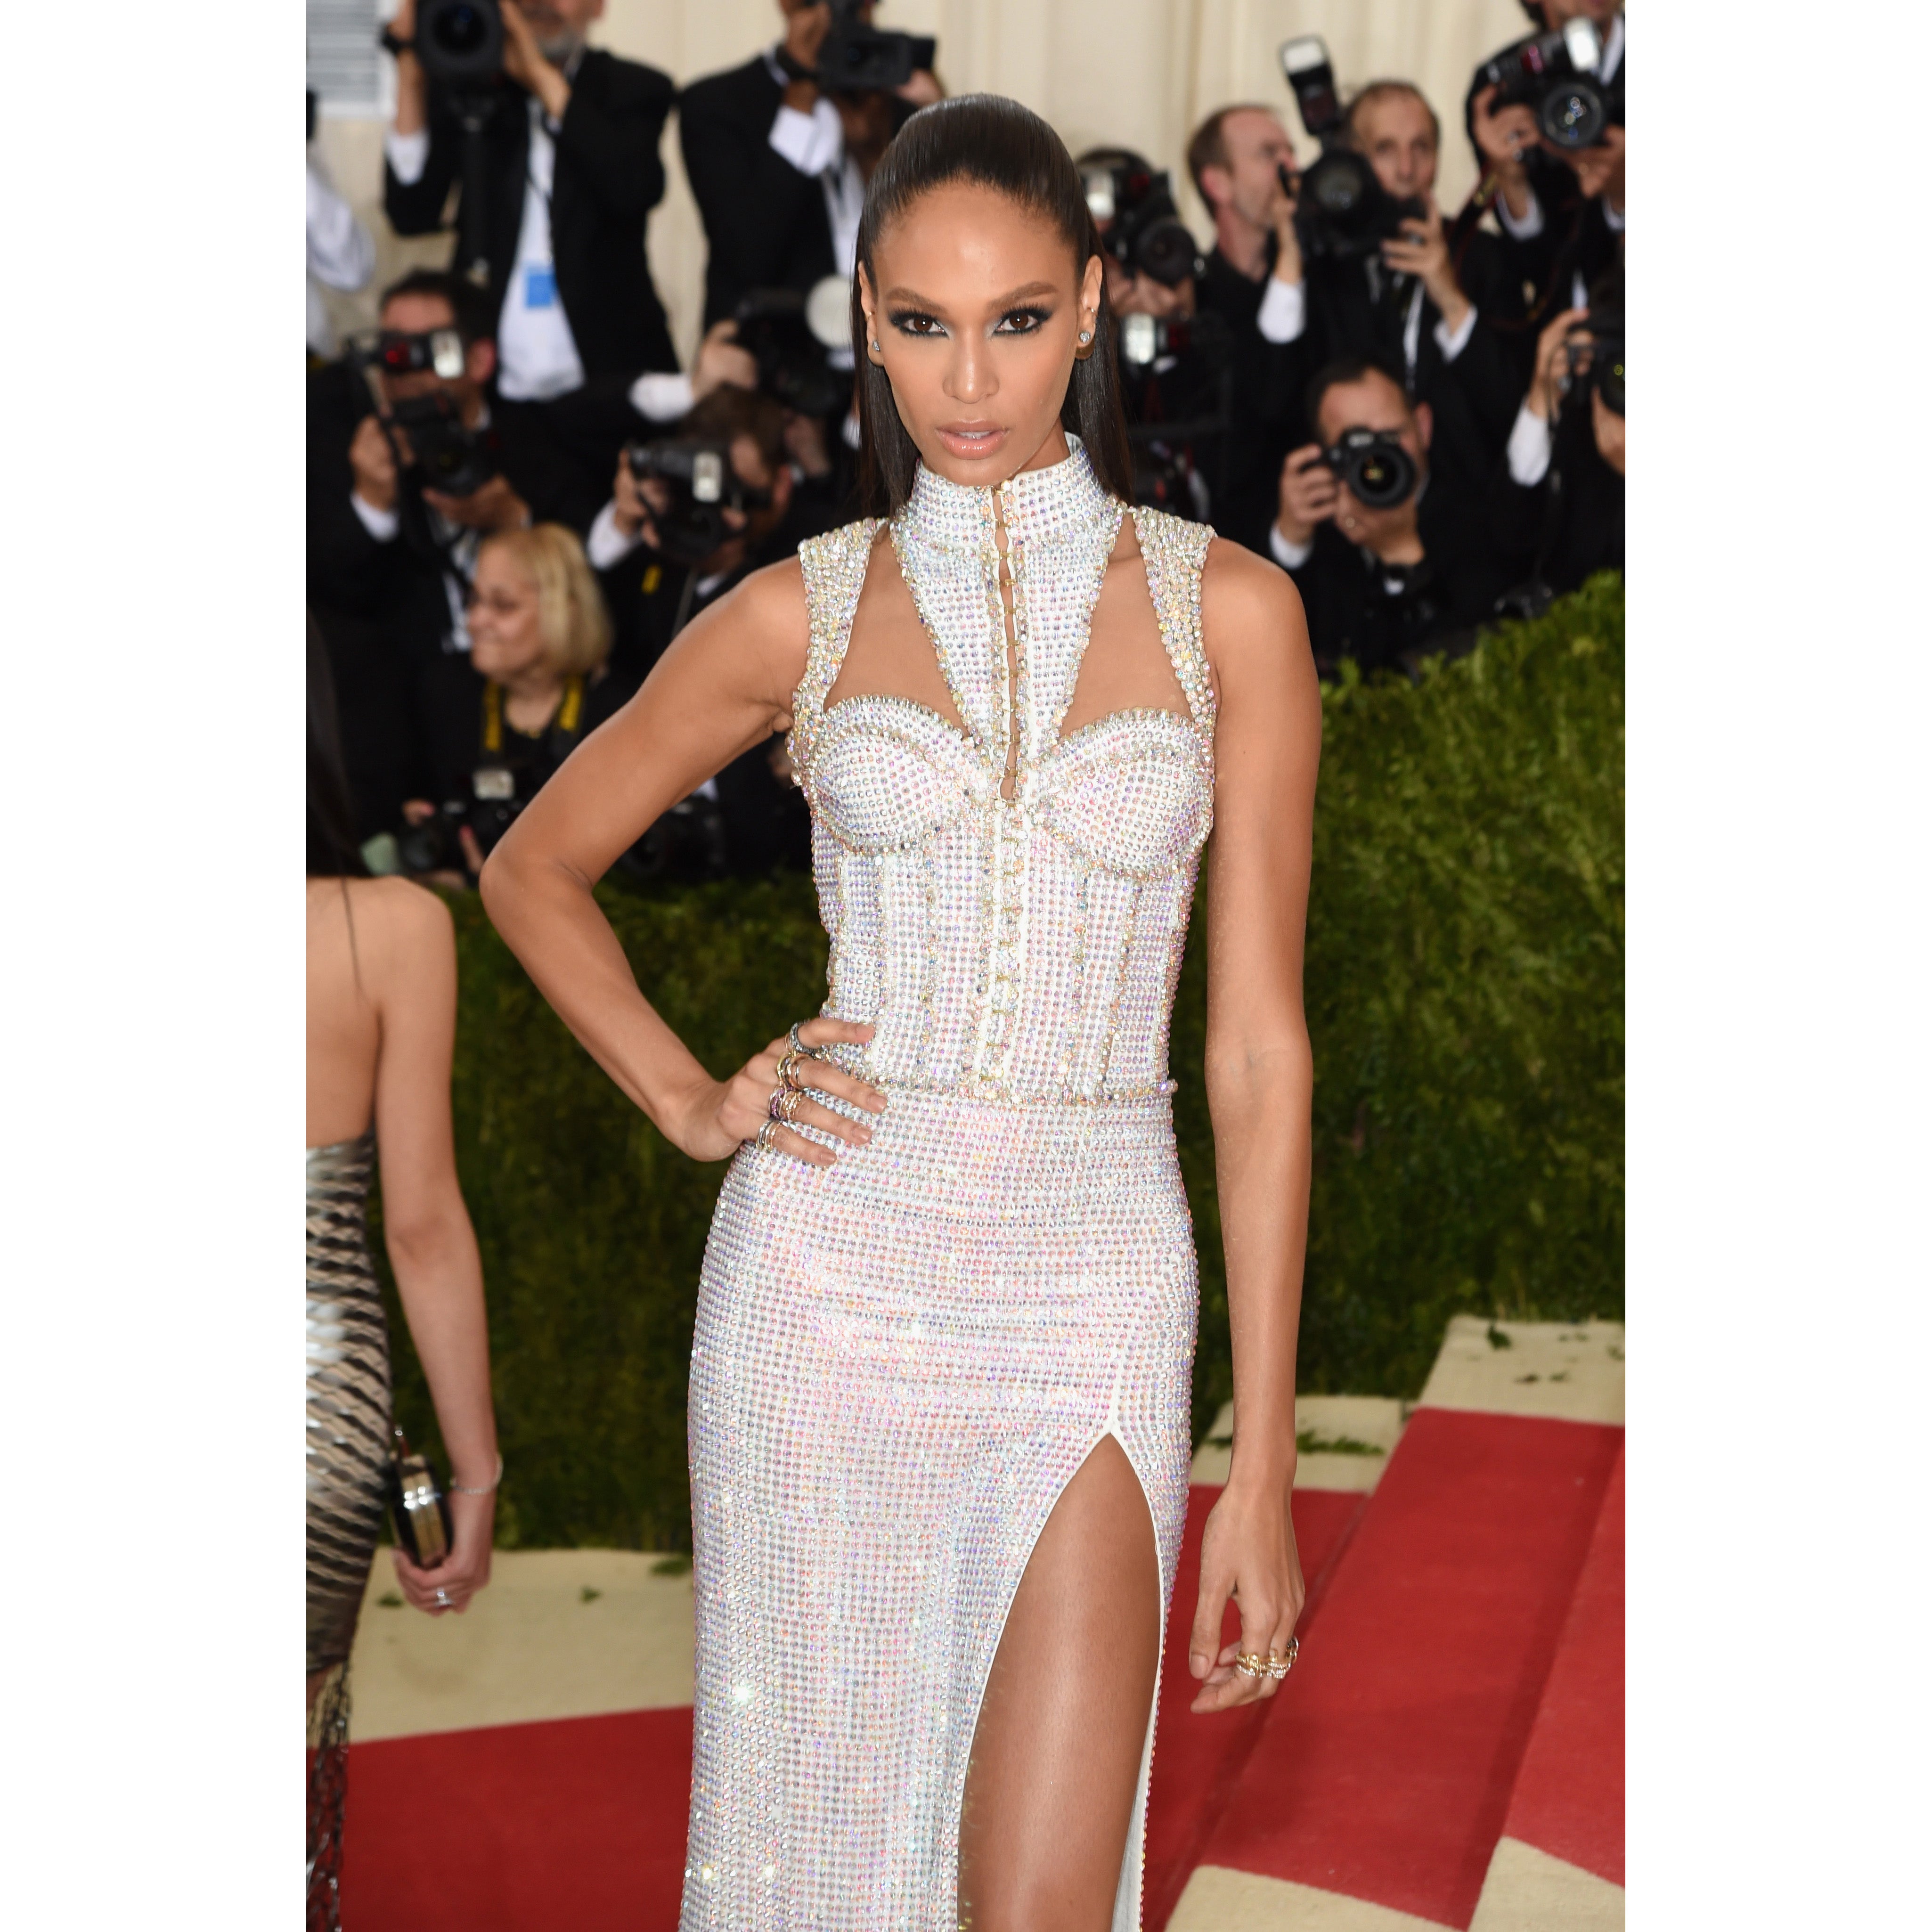 The 2016 Met Gala Red Carpet Was Out Of This World
